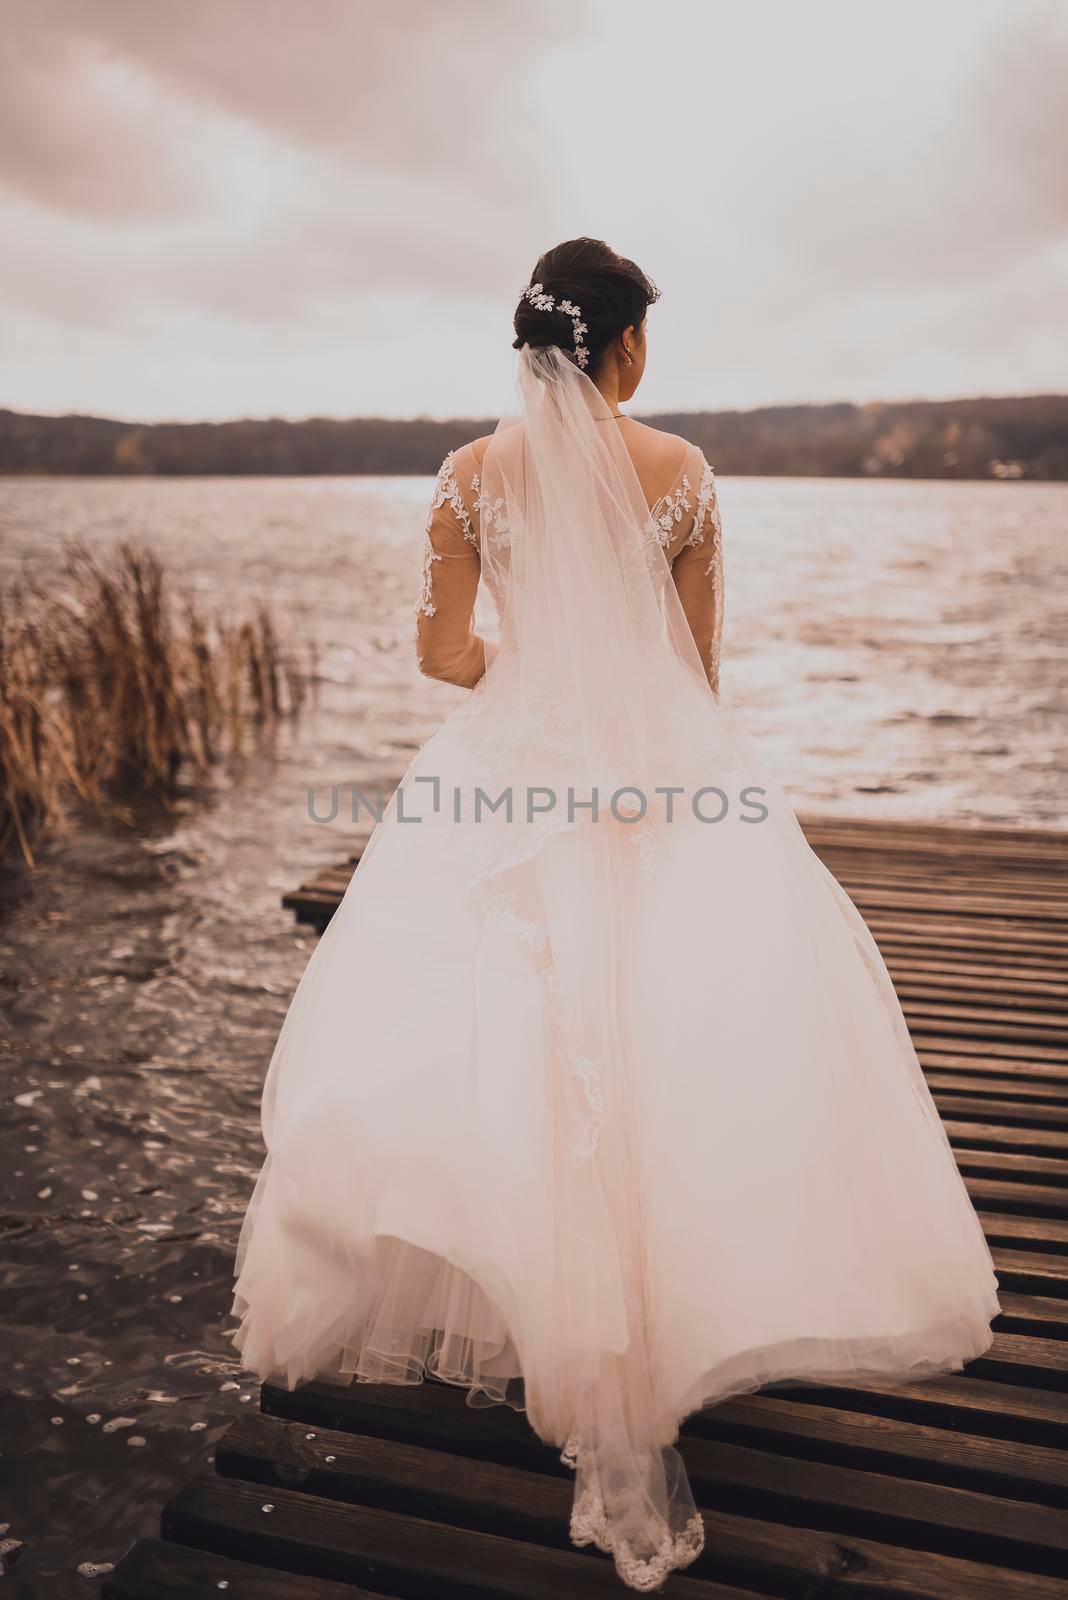 A young woman bride stands on a wooden brown pier by AndriiDrachuk